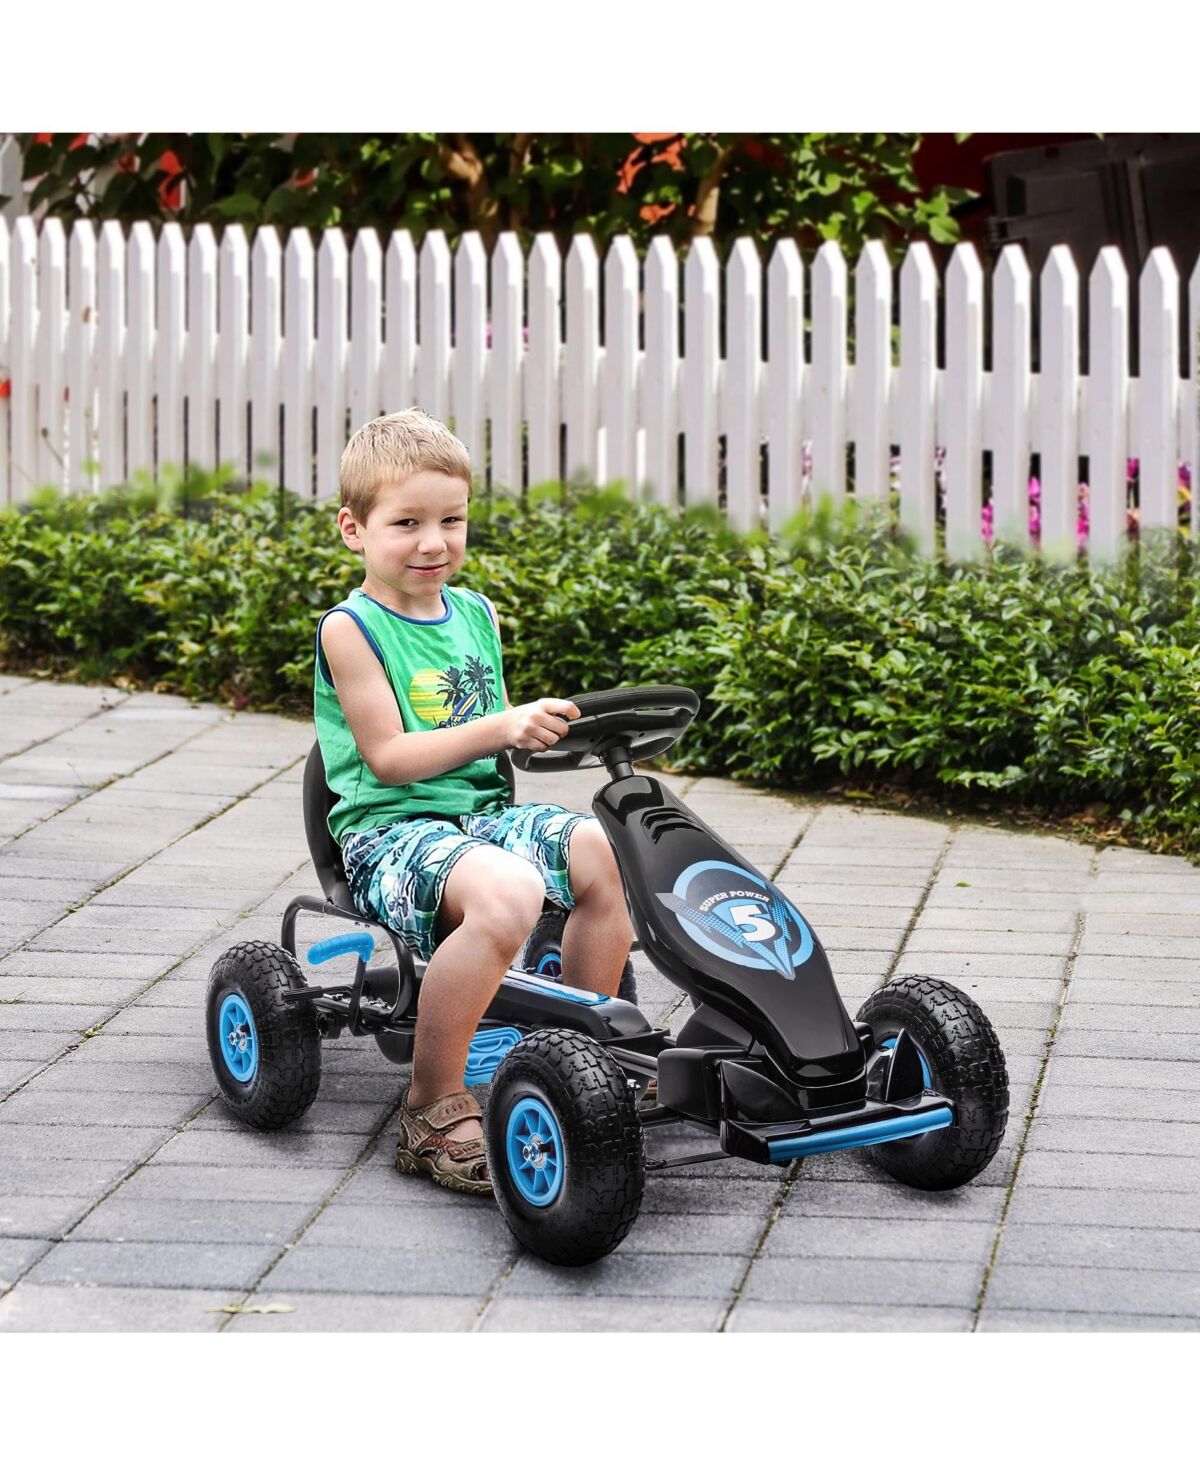 Aosom Kids Pedal Go Kart Ride-on Toy with Ergonomic Comfort, Pedal Car with Tough, Wear-Resistant Tread, Go Cart Kids Car for Boys & Girls with Suspen